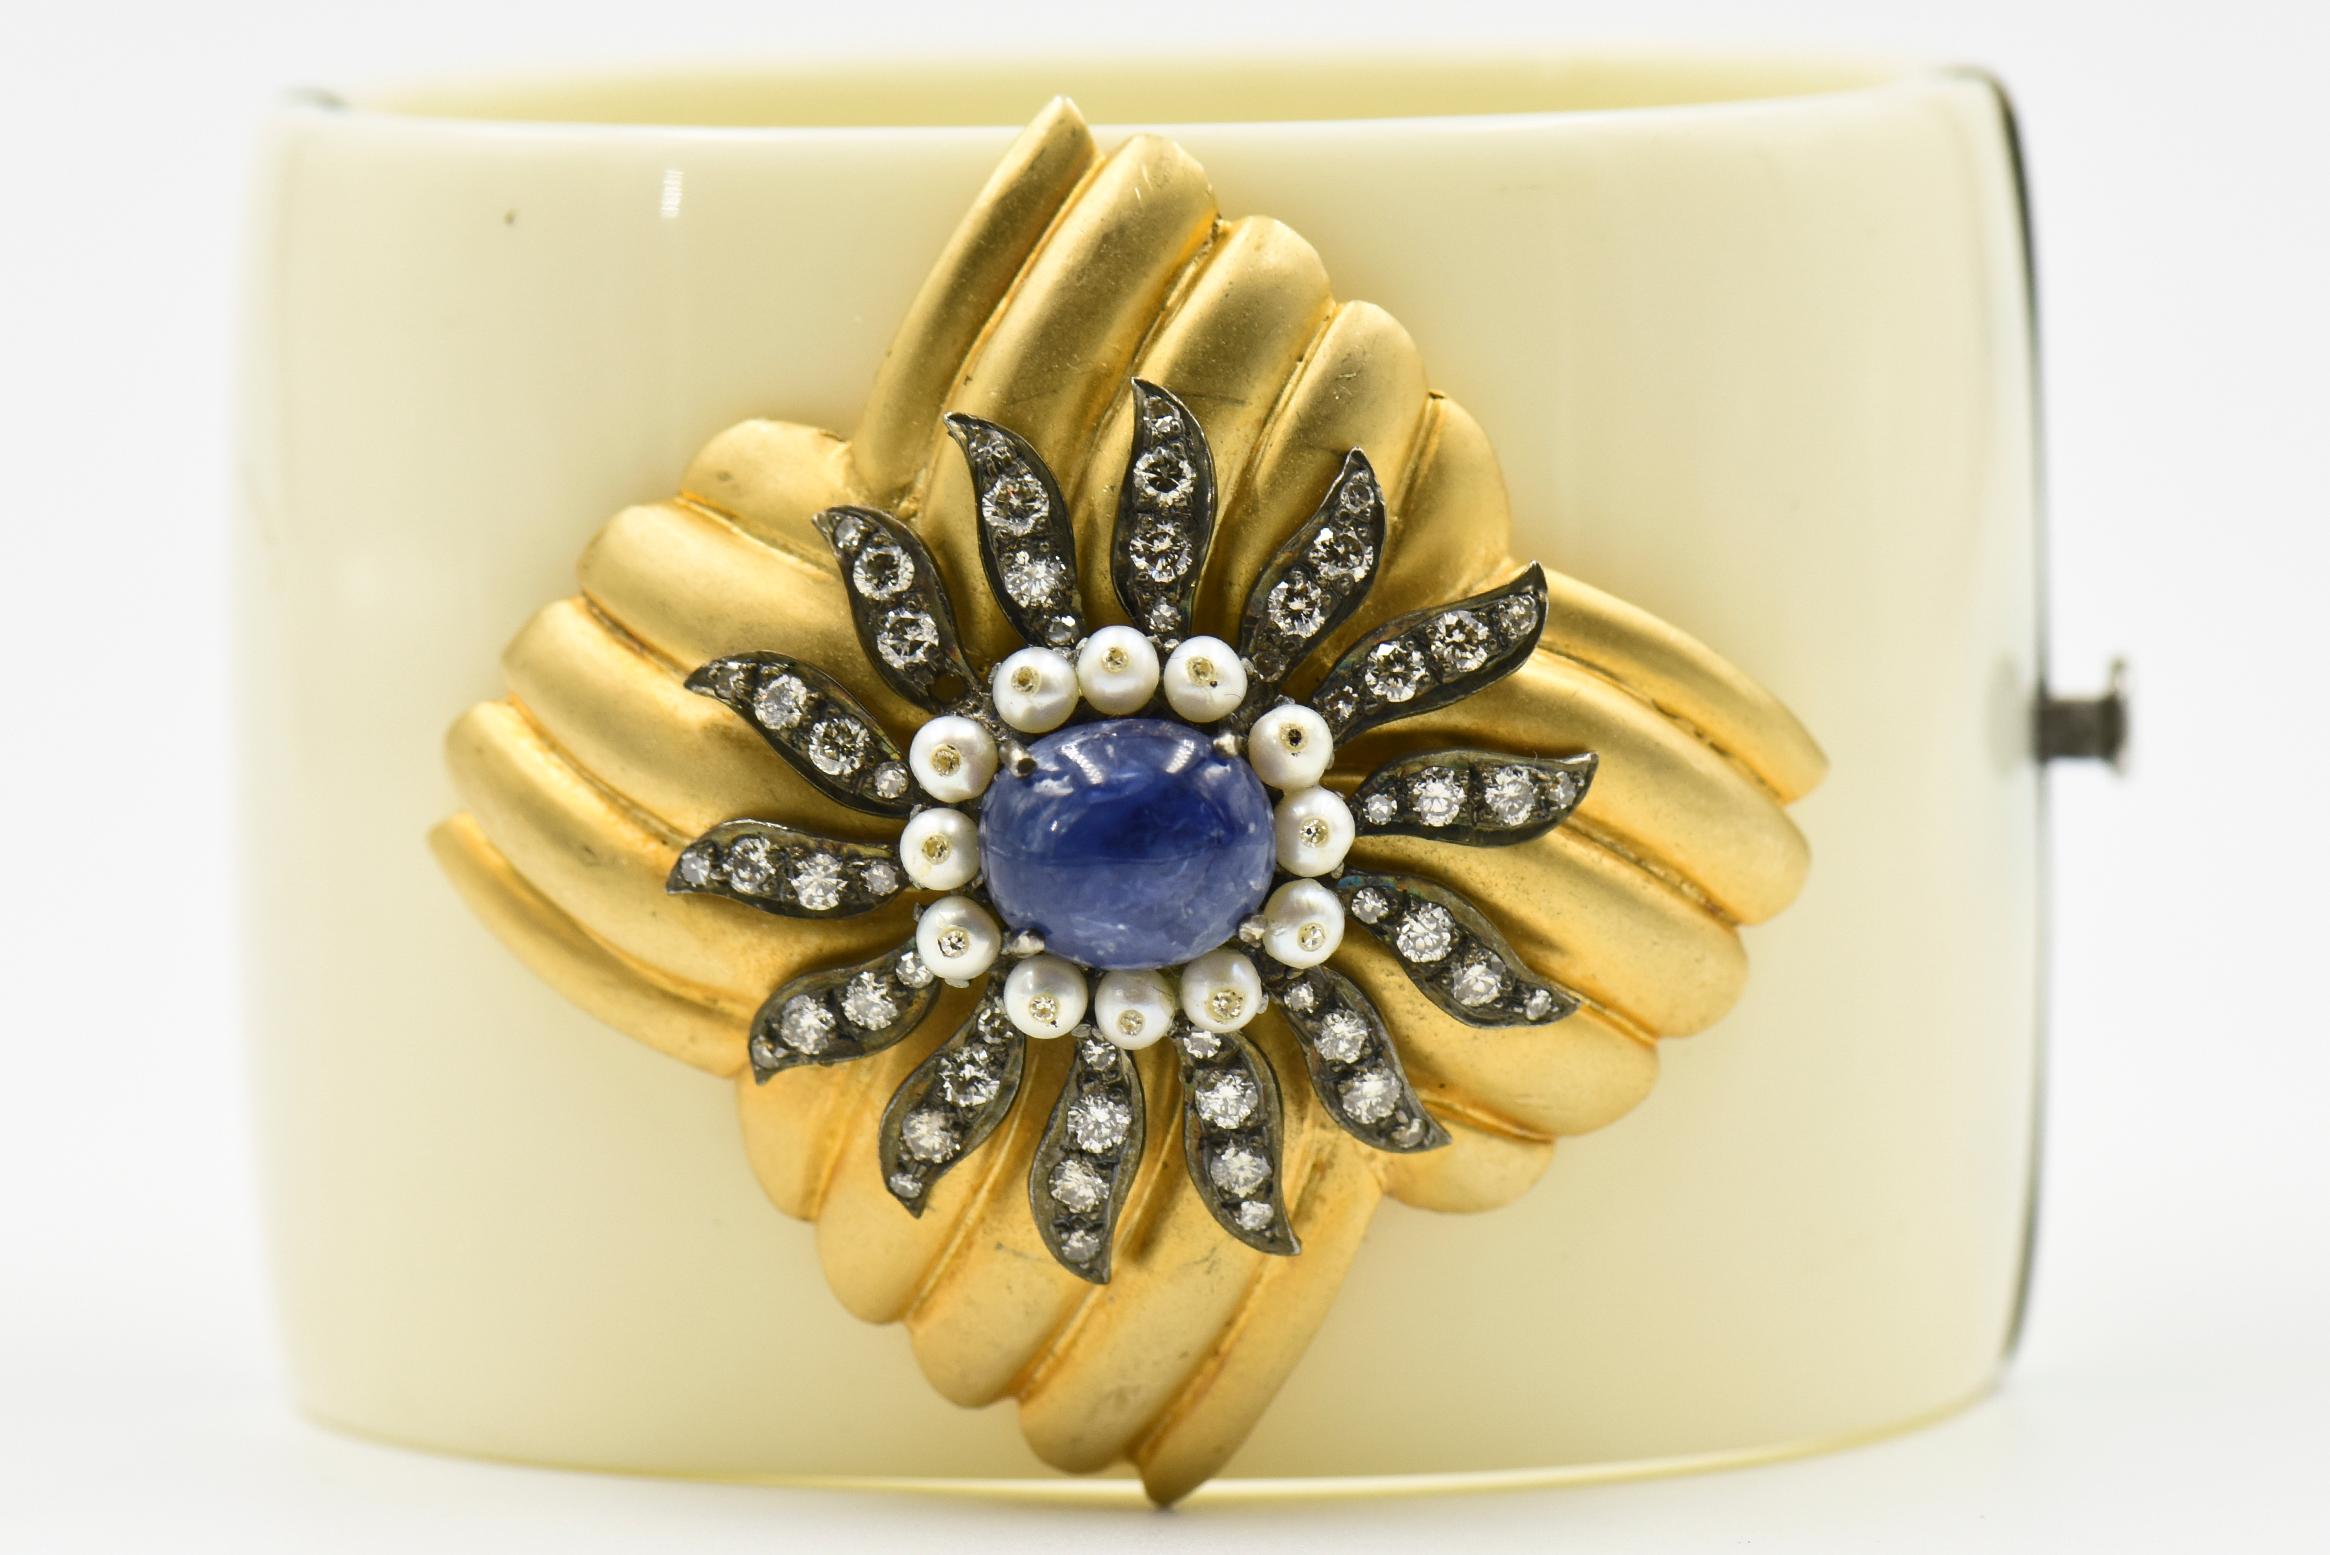 Diamond, Sapphire, and Pearl Gold Floral Accent on a Bakelite Bangle Bracelet For Sale 4